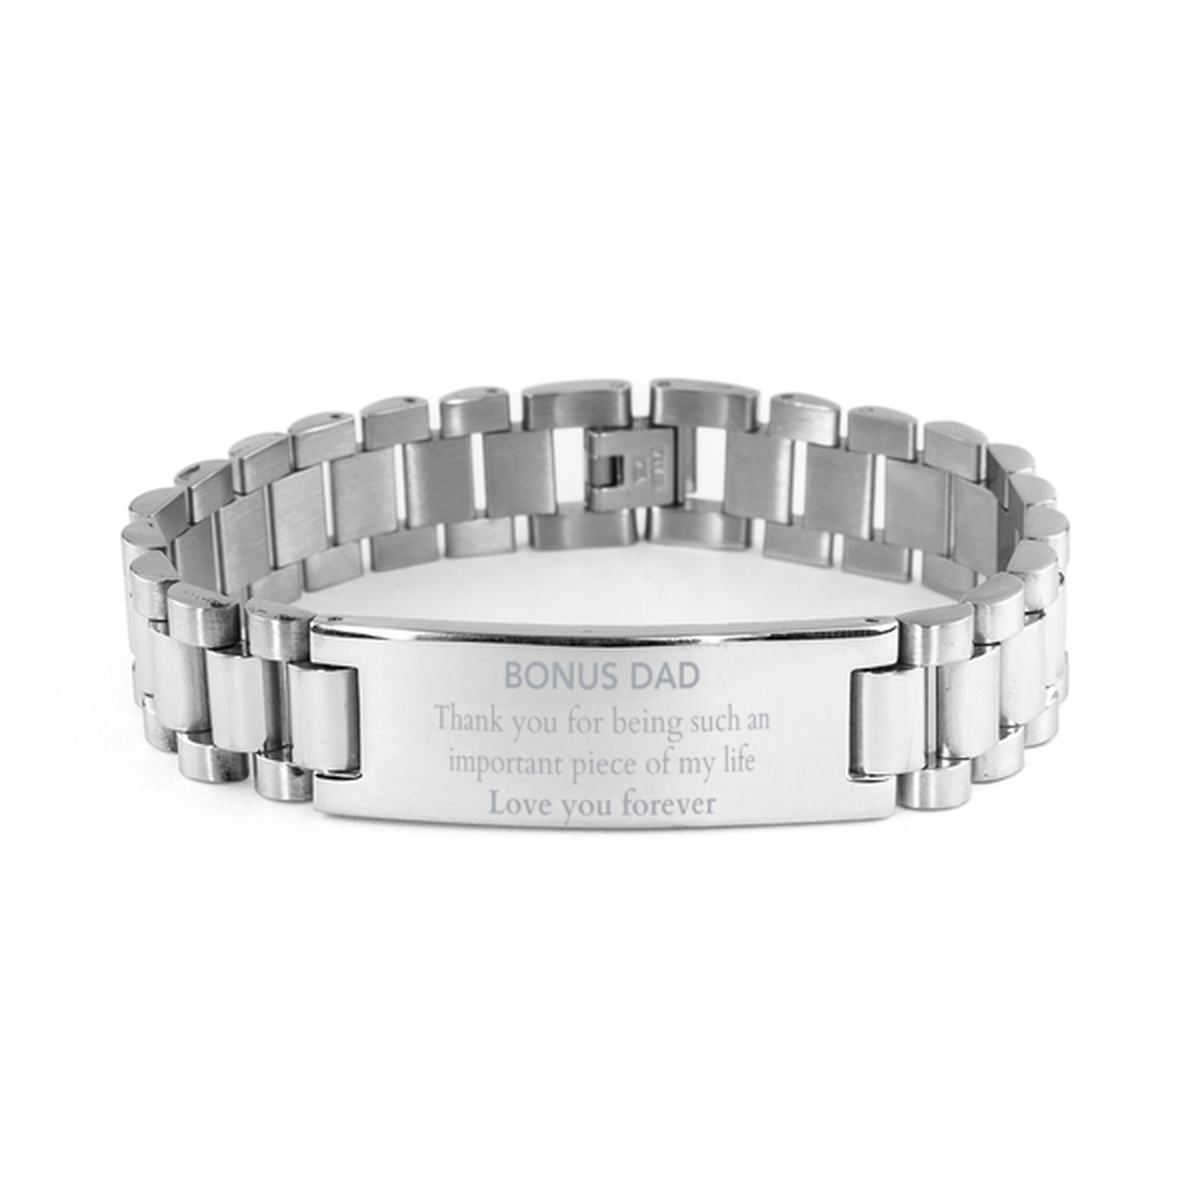 Appropriate Bonus Dad Ladder Stainless Steel Bracelet Epic Birthday Gifts for Bonus Dad Thank you for being such an important piece of my life Bonus Dad Christmas Mothers Fathers Day